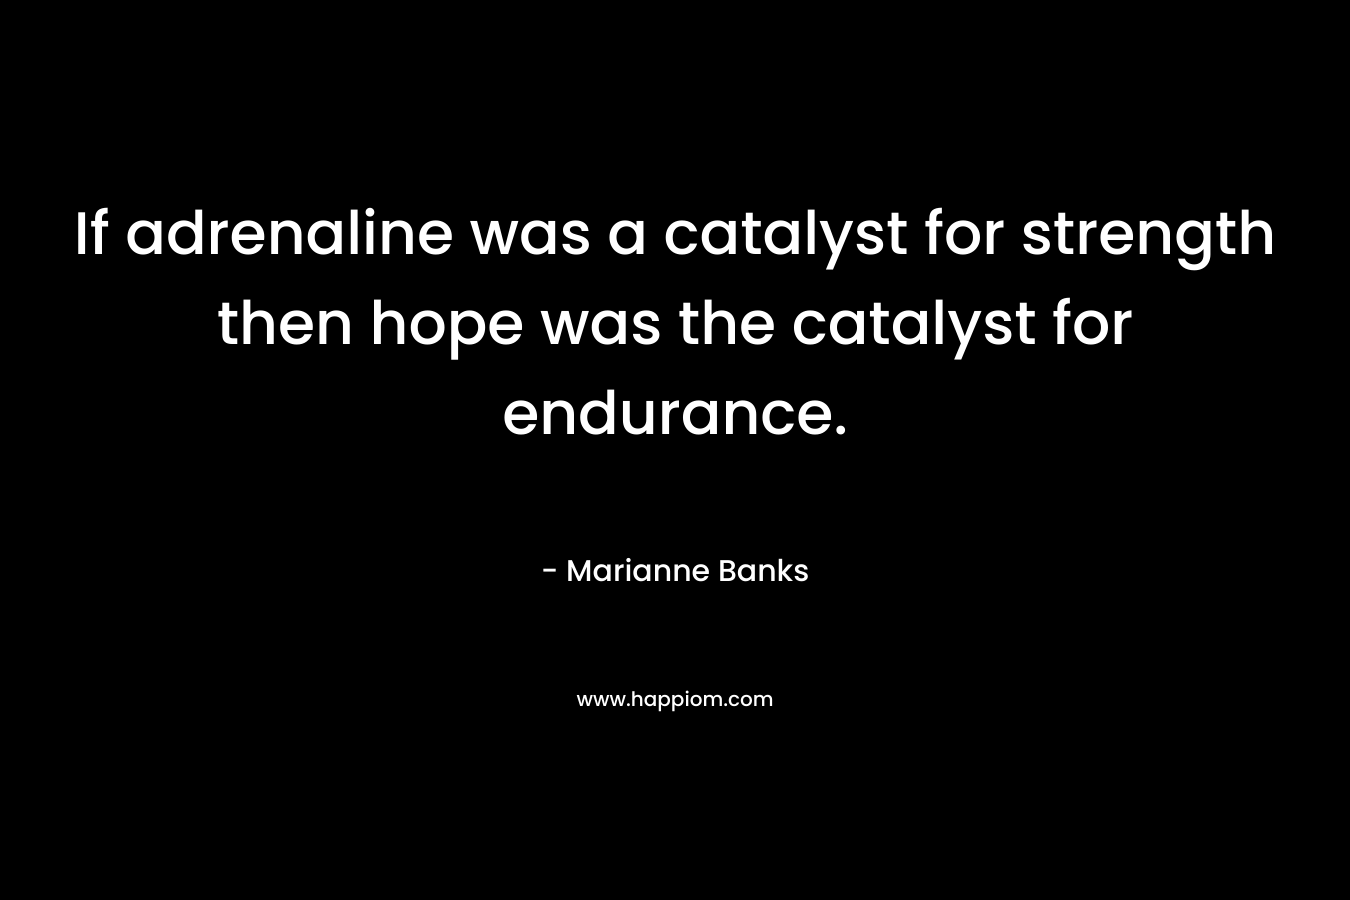 If adrenaline was a catalyst for strength then hope was the catalyst for endurance. – Marianne Banks